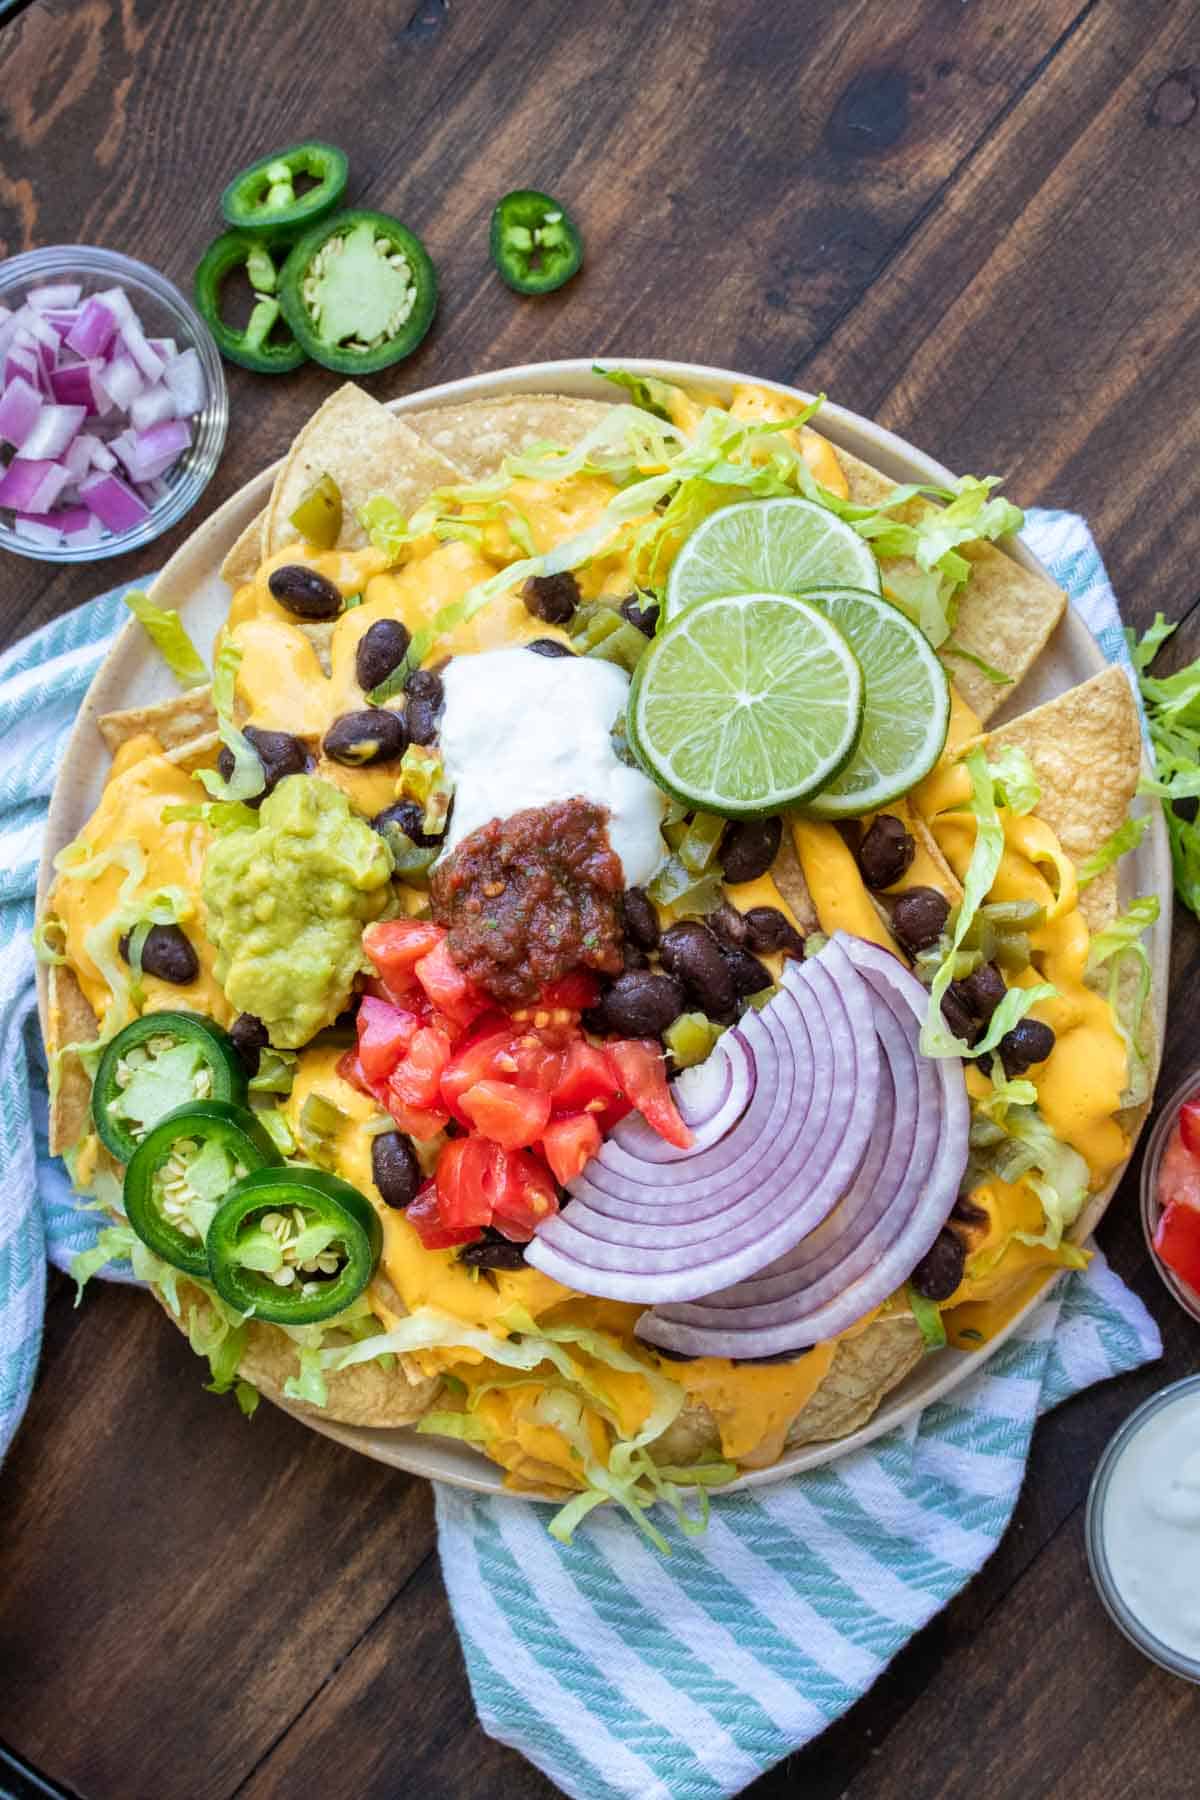 Fully loaded nachos on a tan plate resting on a striped napkin.